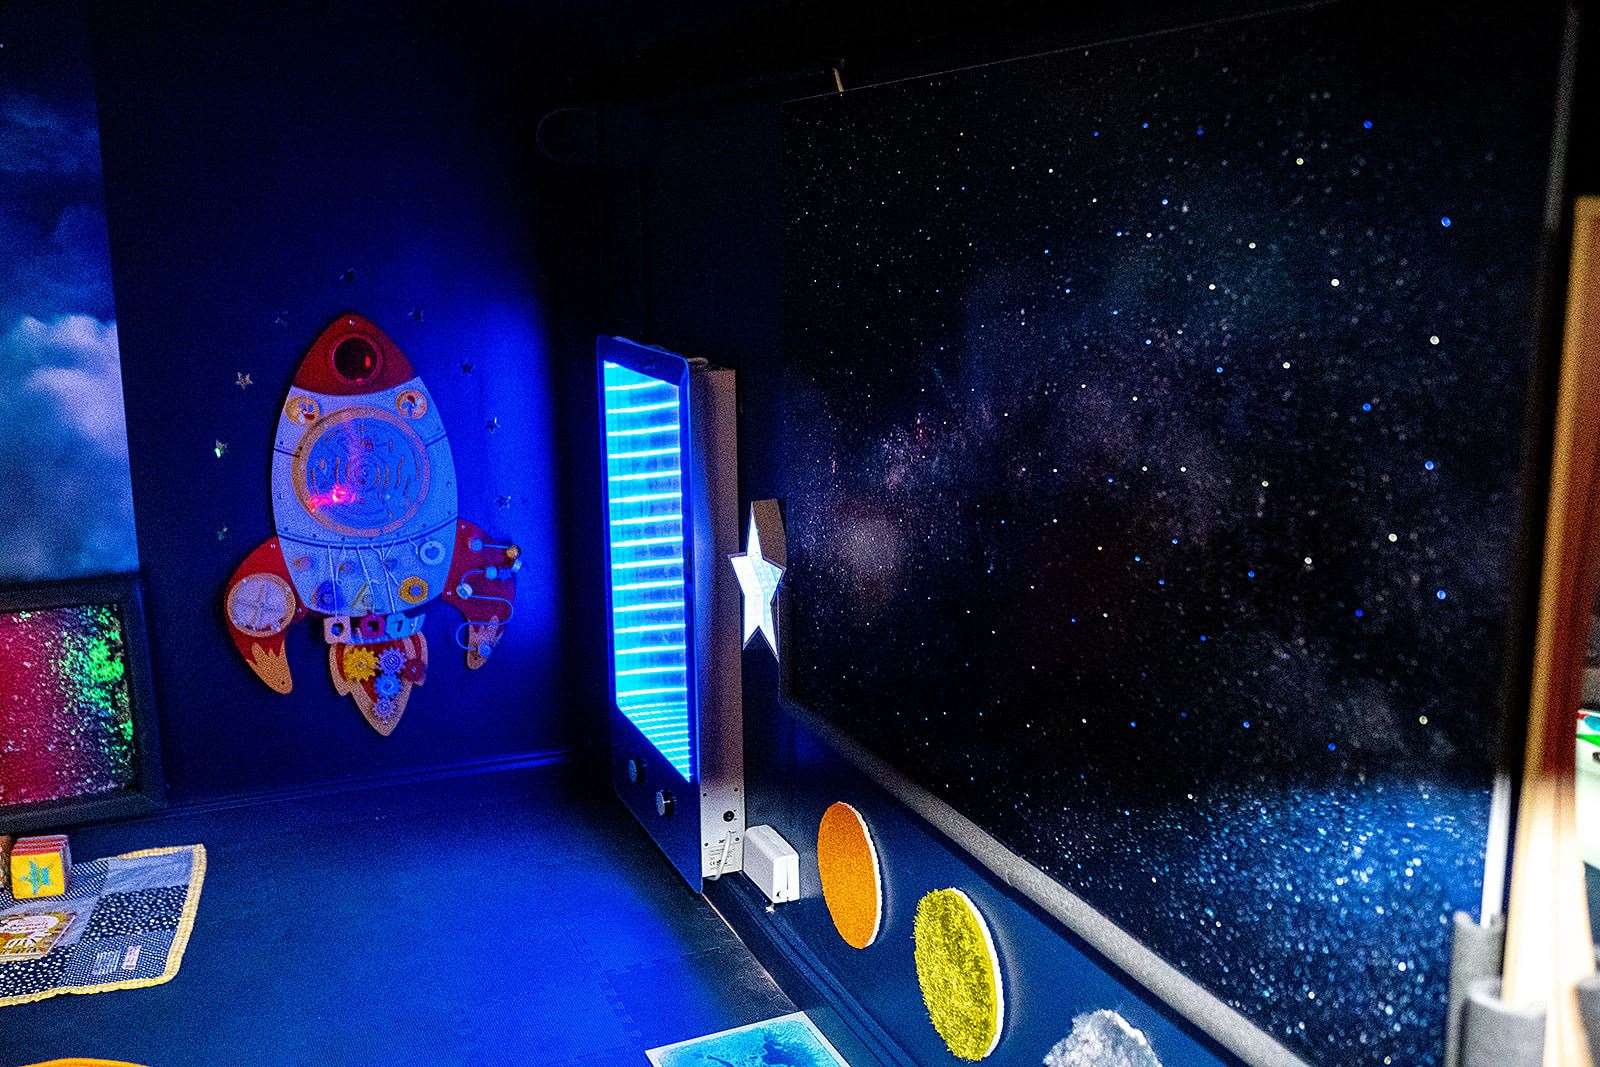 The sensory room has a space theme. Picture: Hannah Lamprell